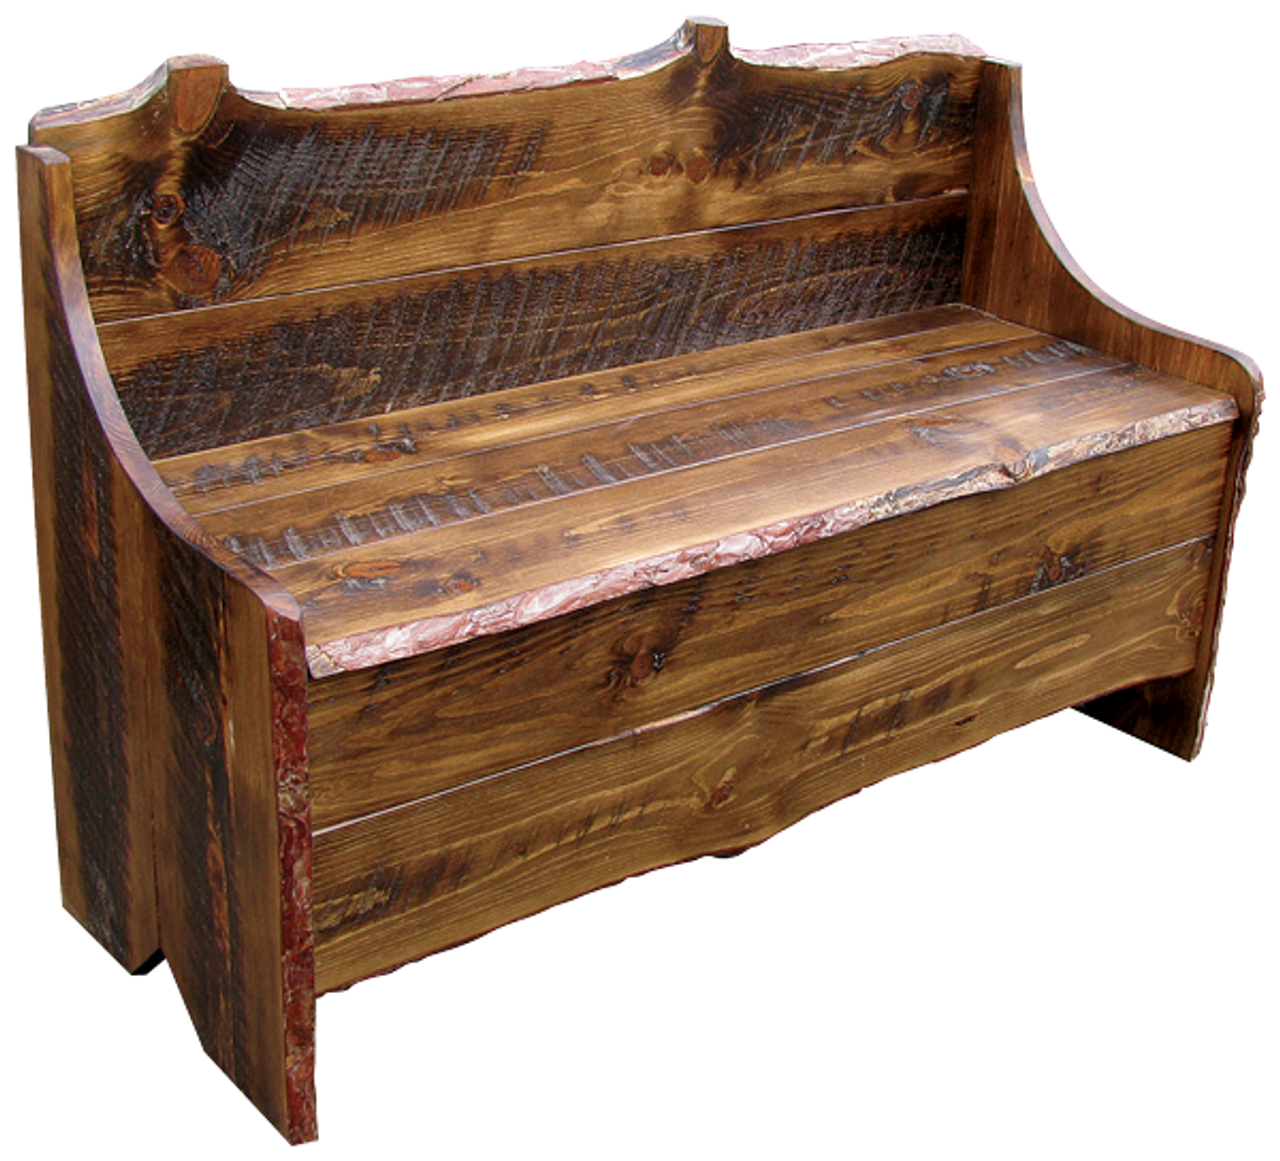 Rustic Rough Sawn Boot Bench Wood Furniture Wholesale Sawdust